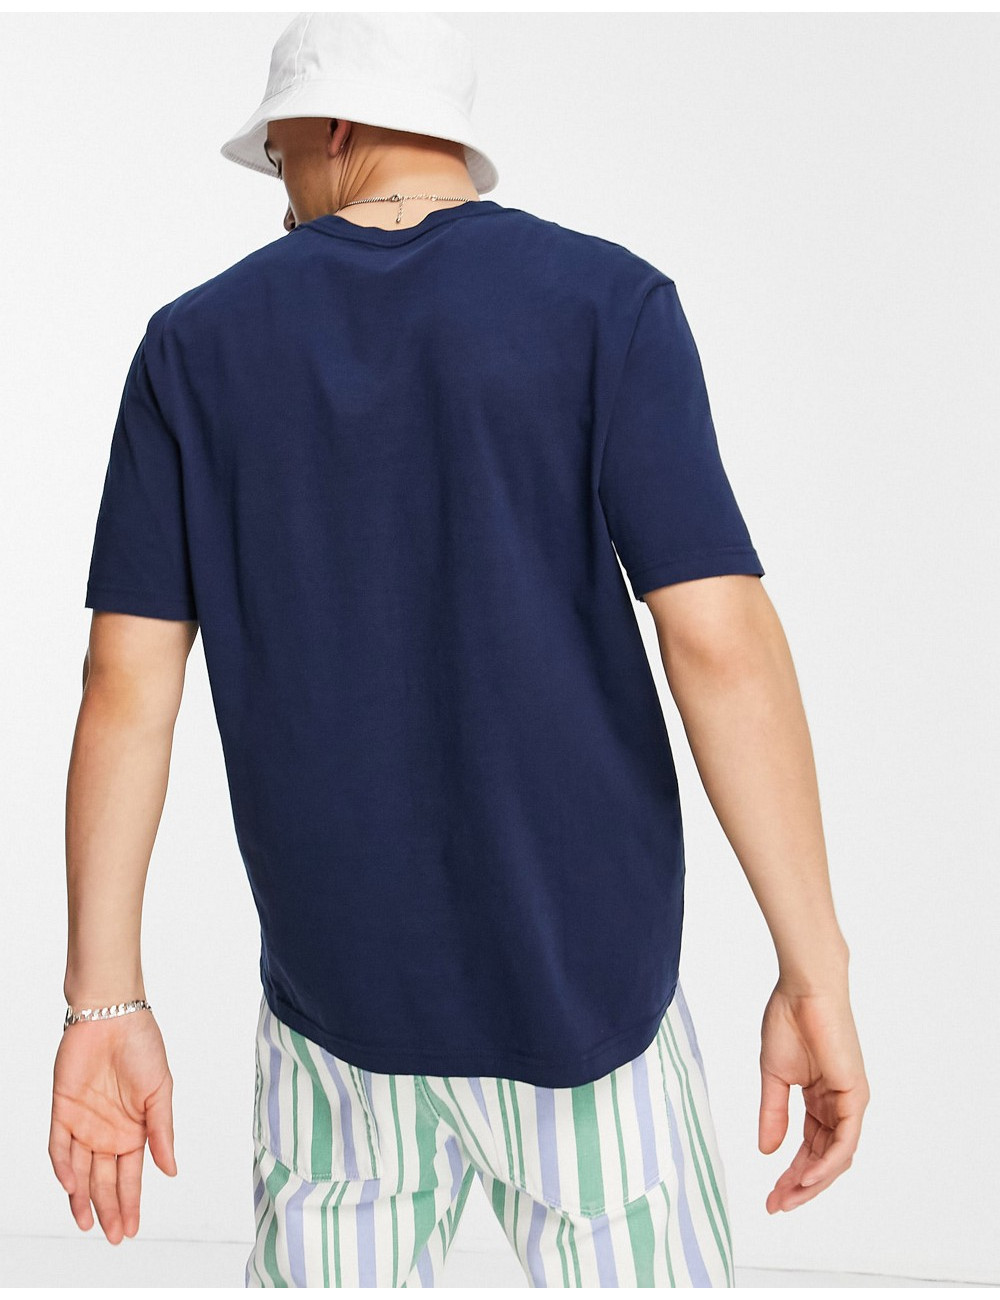 Levi's t-shirt in navy with...